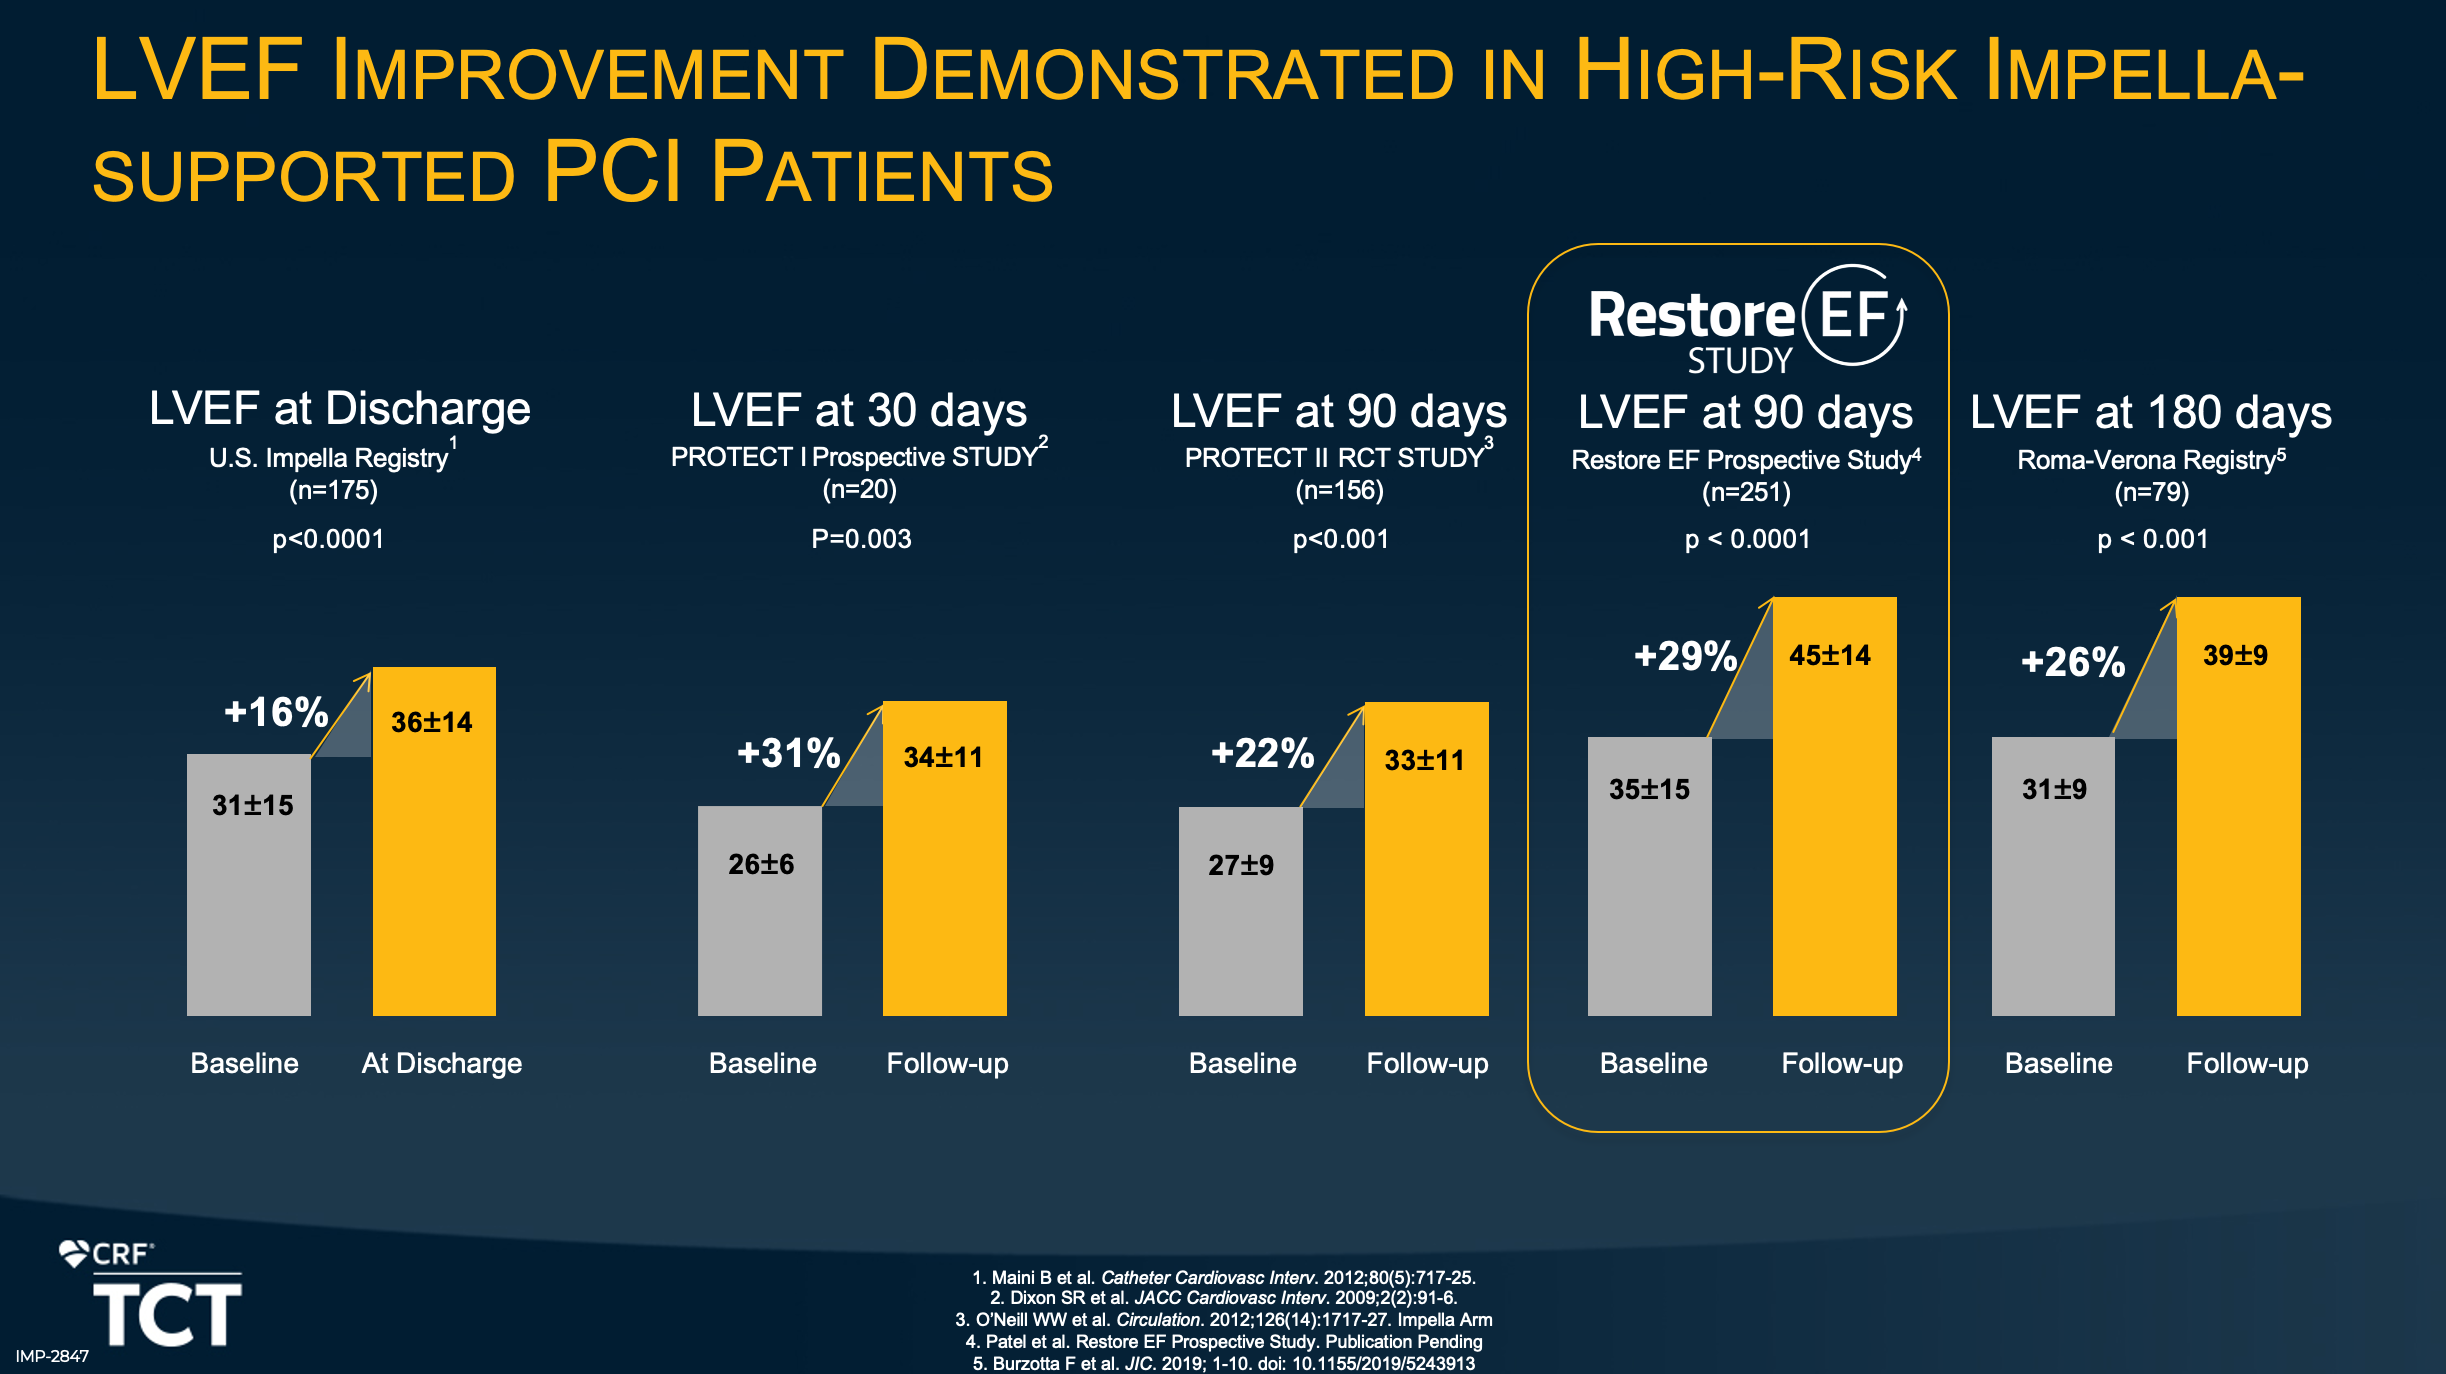 TCT 2021 Slide showing LVEF Improvement Demonstrated in High-Risk Impella-supported PCI Patients